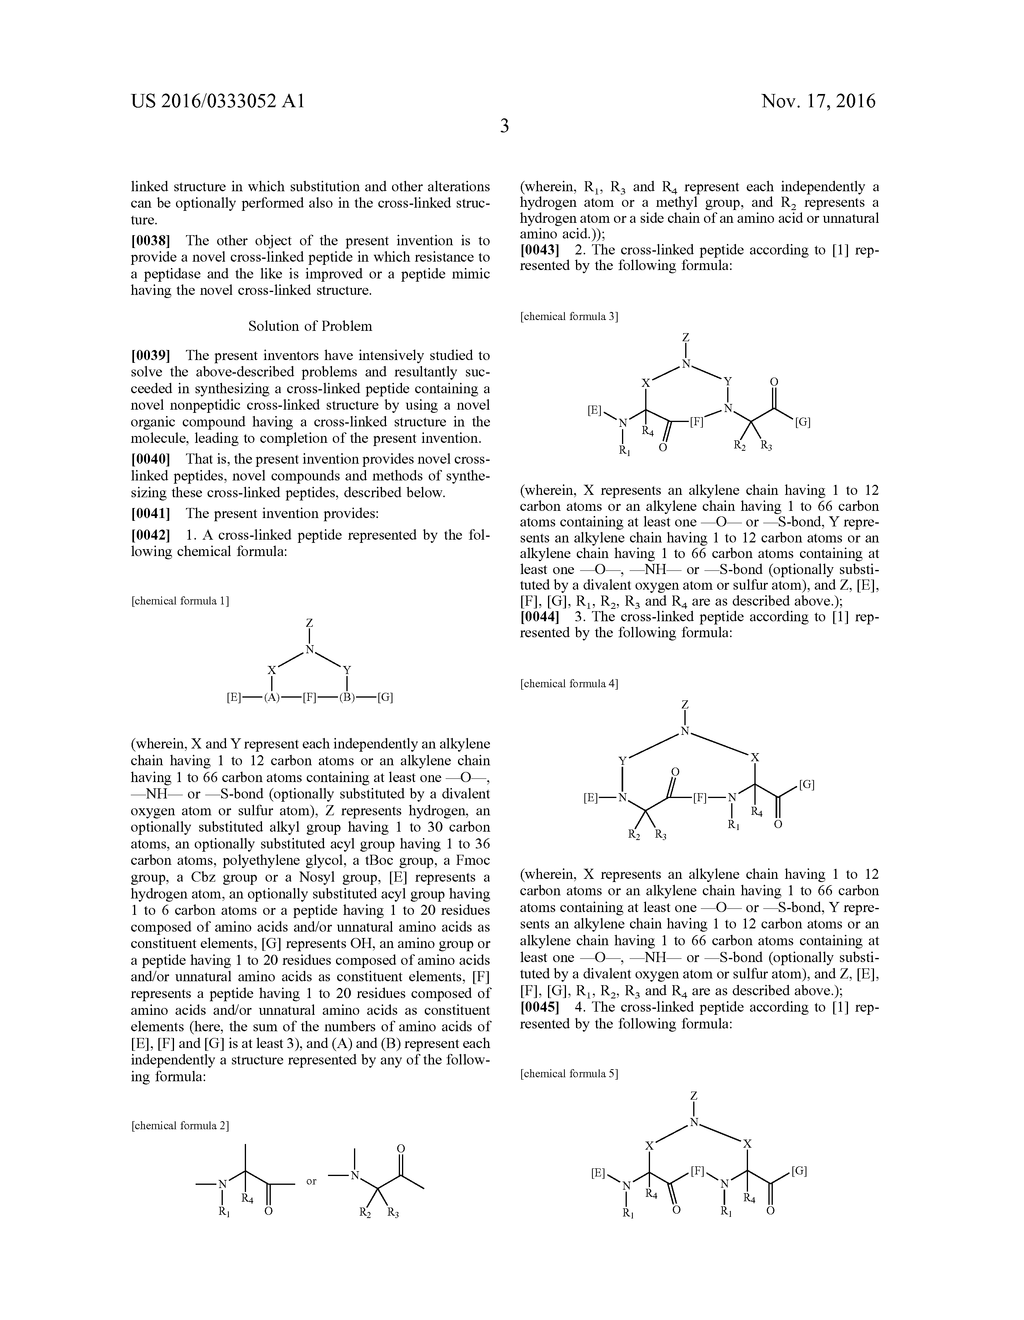 NOVEL CROSS-LINKED PEPTIDES CONTAINING NON-PEPTIDE CROSS-LINKED STRUCTURE,     METHOD FOR SYNTHESIZING CROSS-LINKED PEPTIDES, AND NOVEL ORGANIC COMPOUND     USED IN METHOD - diagram, schematic, and image 17